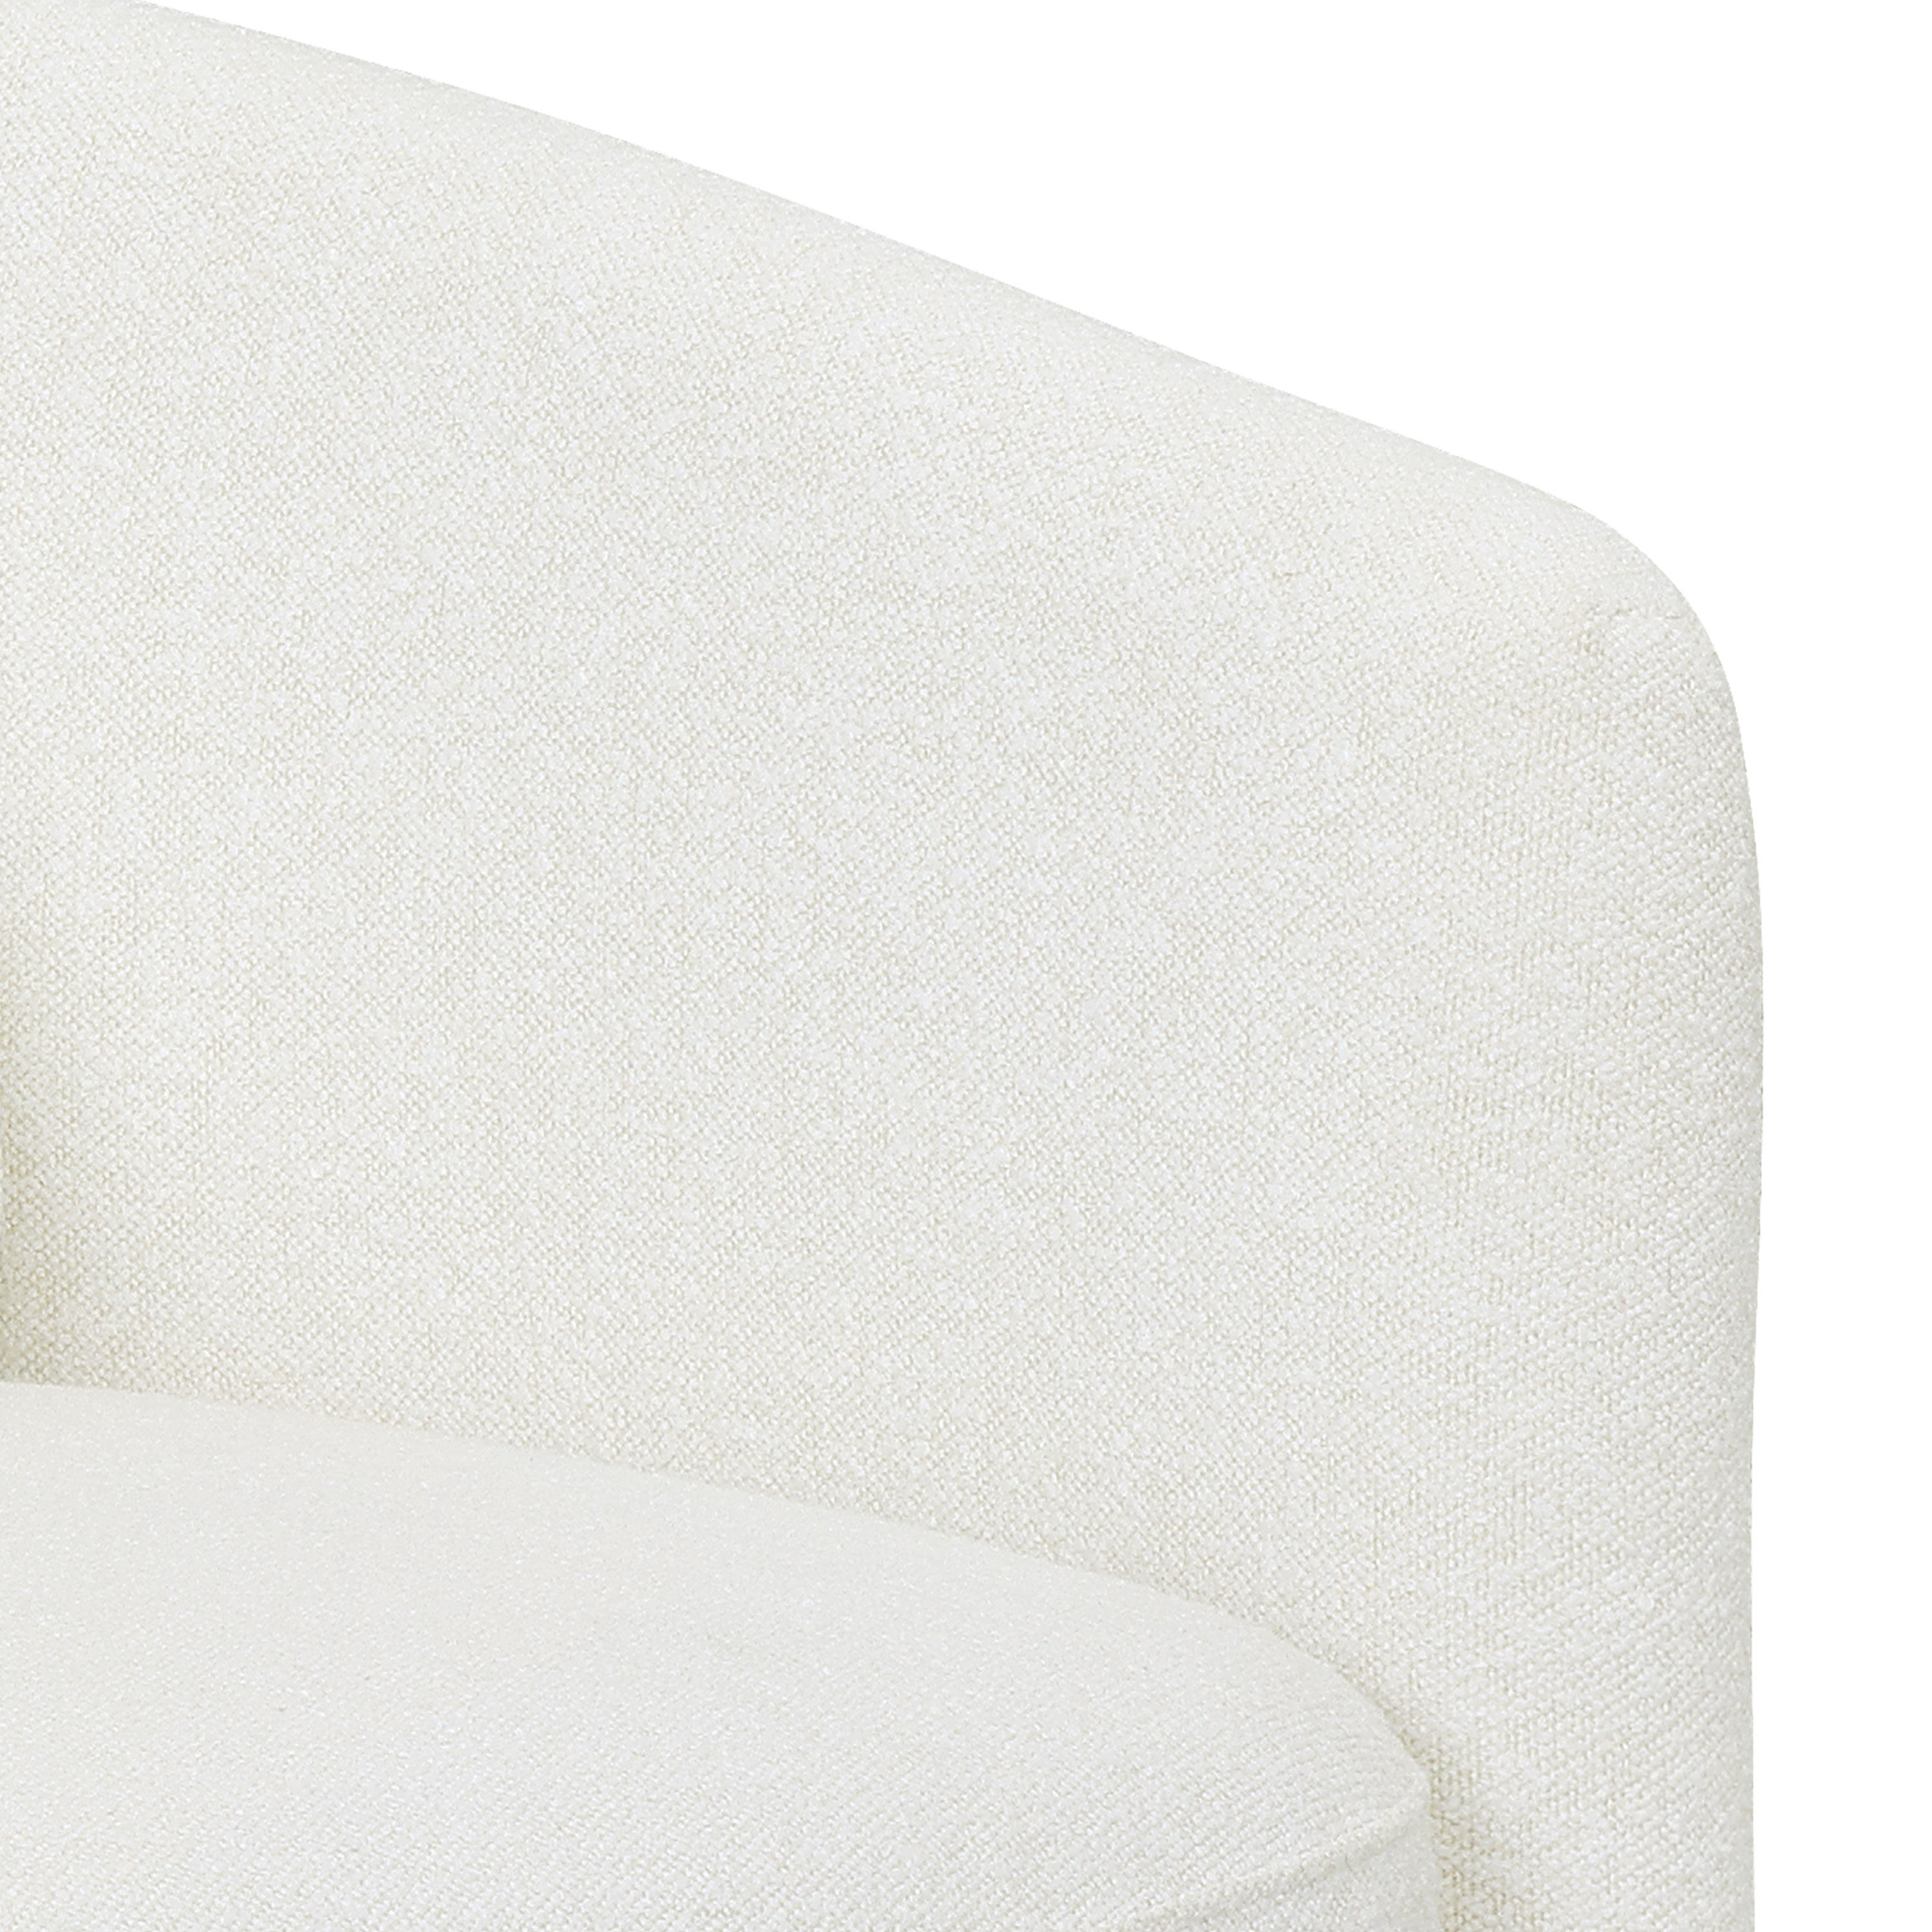 Beautiful Drew Chair by Drew Barrymore, Cream - image 7 of 11